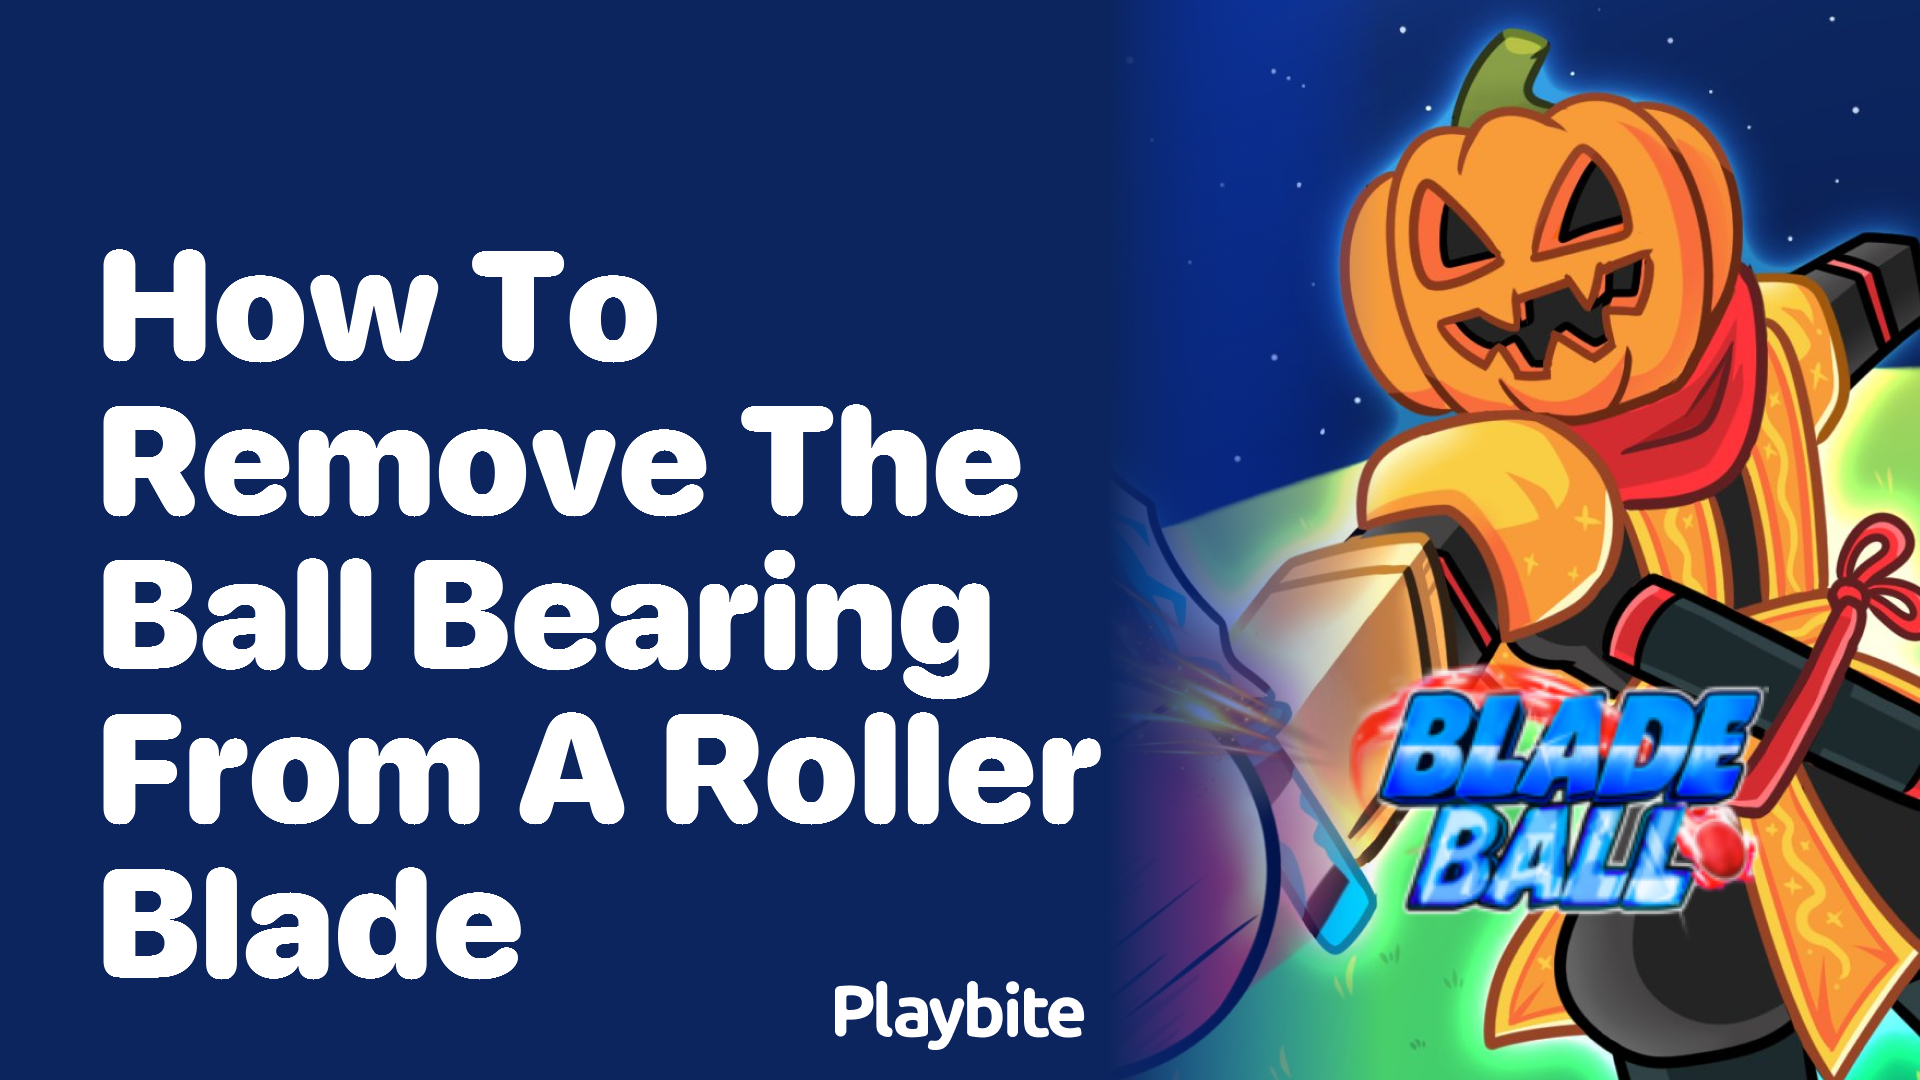 How to Remove the Ball Bearing From a Roller Blade